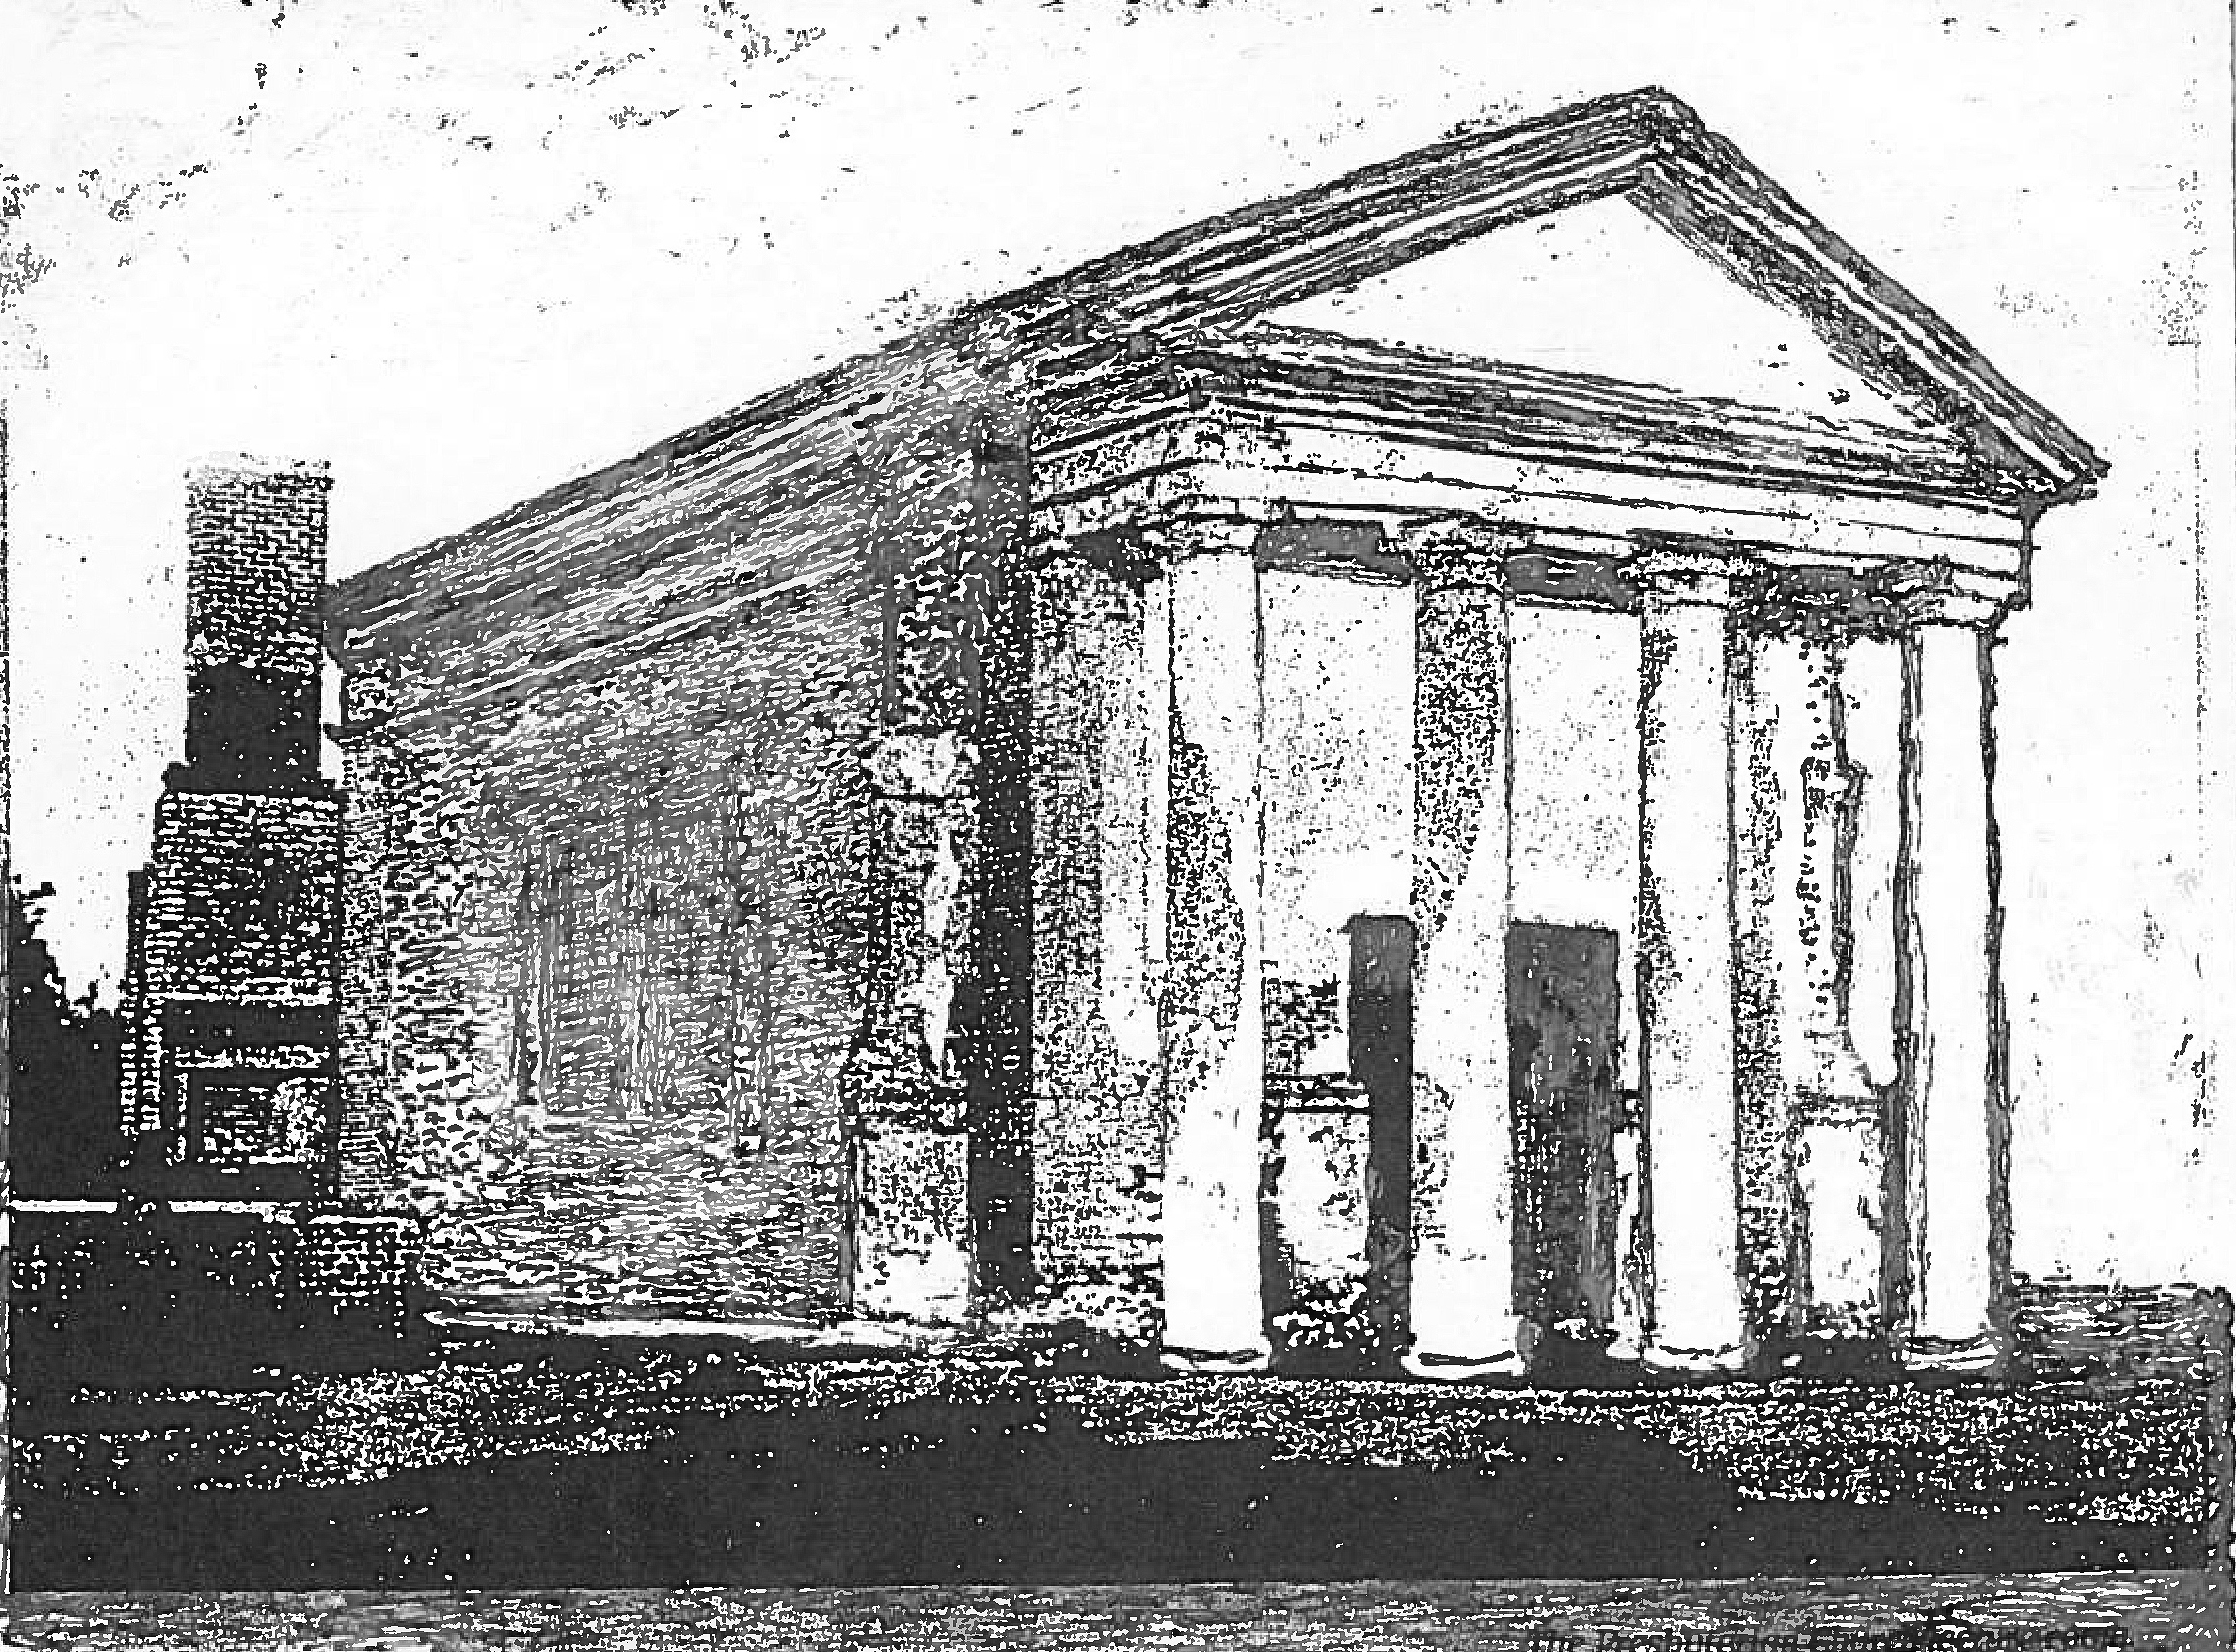 George Edward Walker’s Reading-Lecture Rooms for First Presbyterian Church in Columbia was completed in 1856. This mixed-media image was reconstructed from 1865 photos of the ruins by James Kibler.